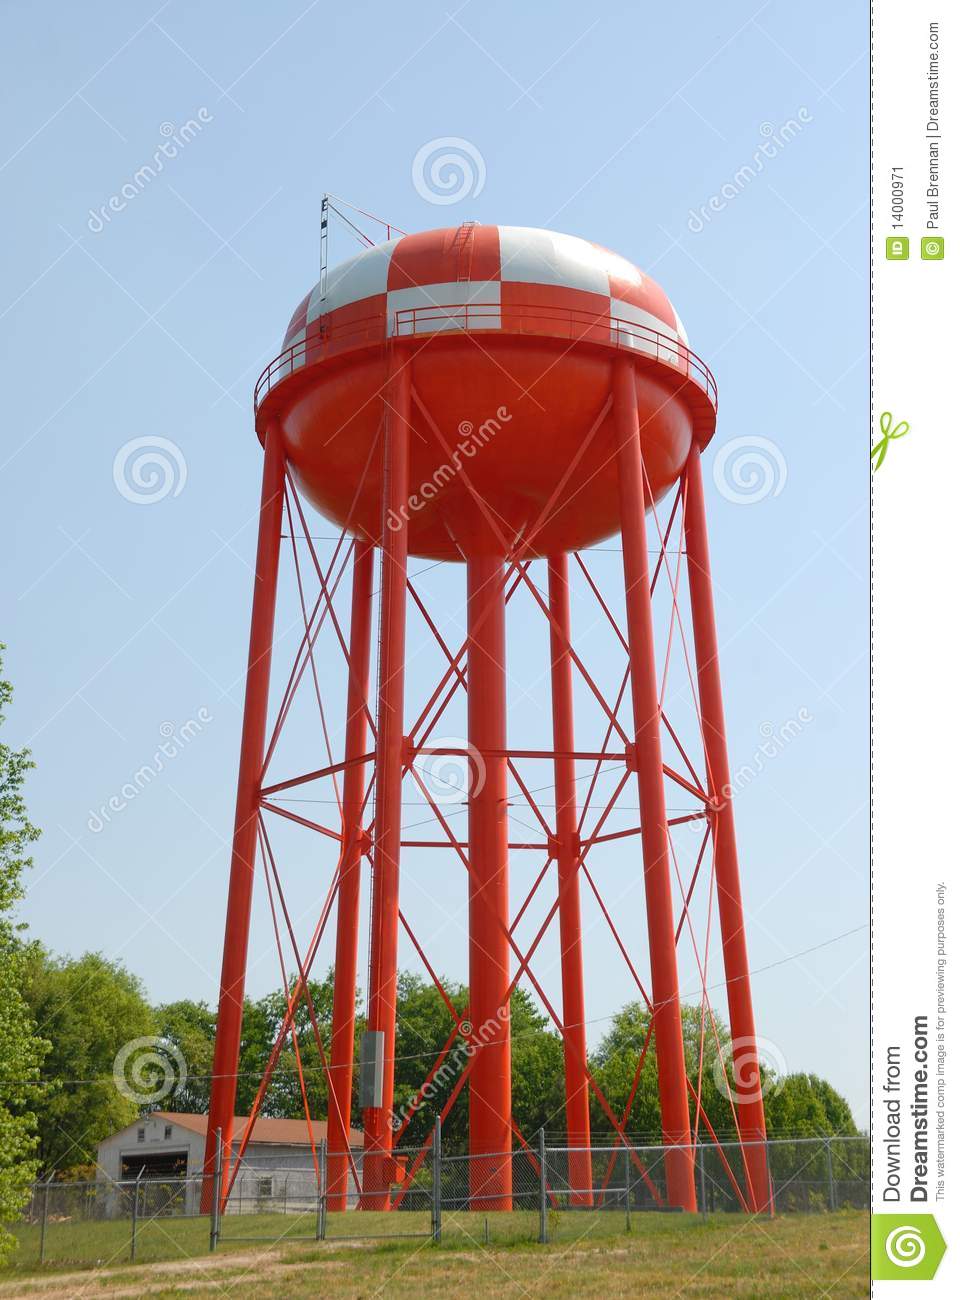 Red And White Water Tower Stock Image   Image  14000971